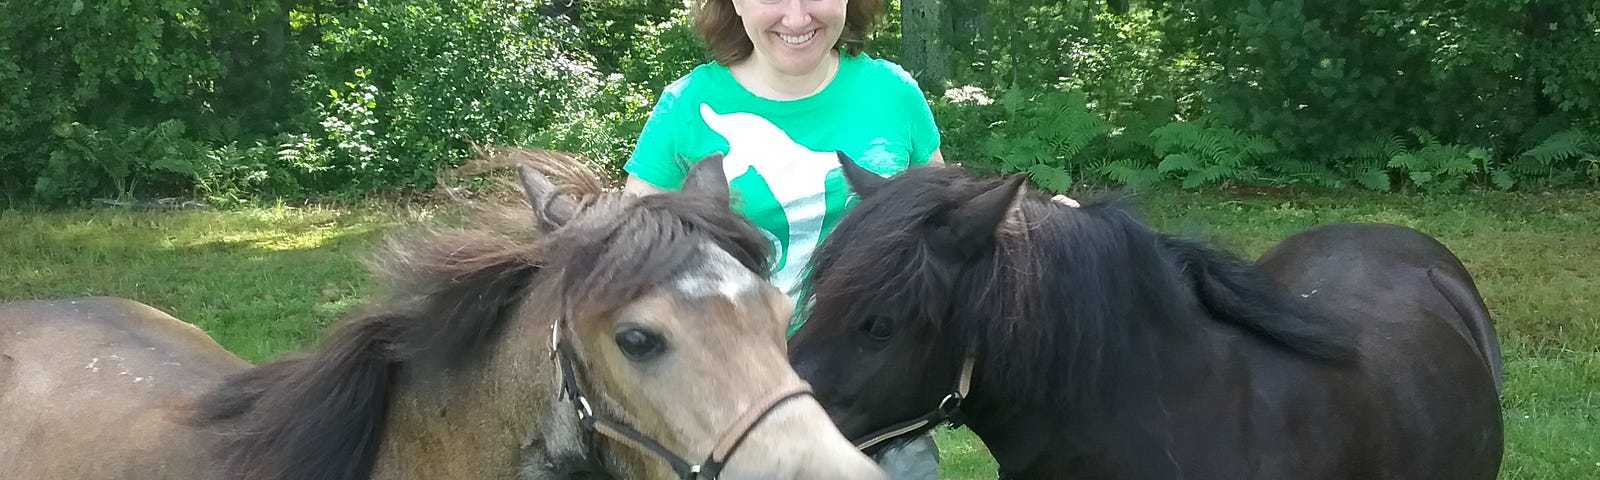 a woman smiles and stands with two small horses